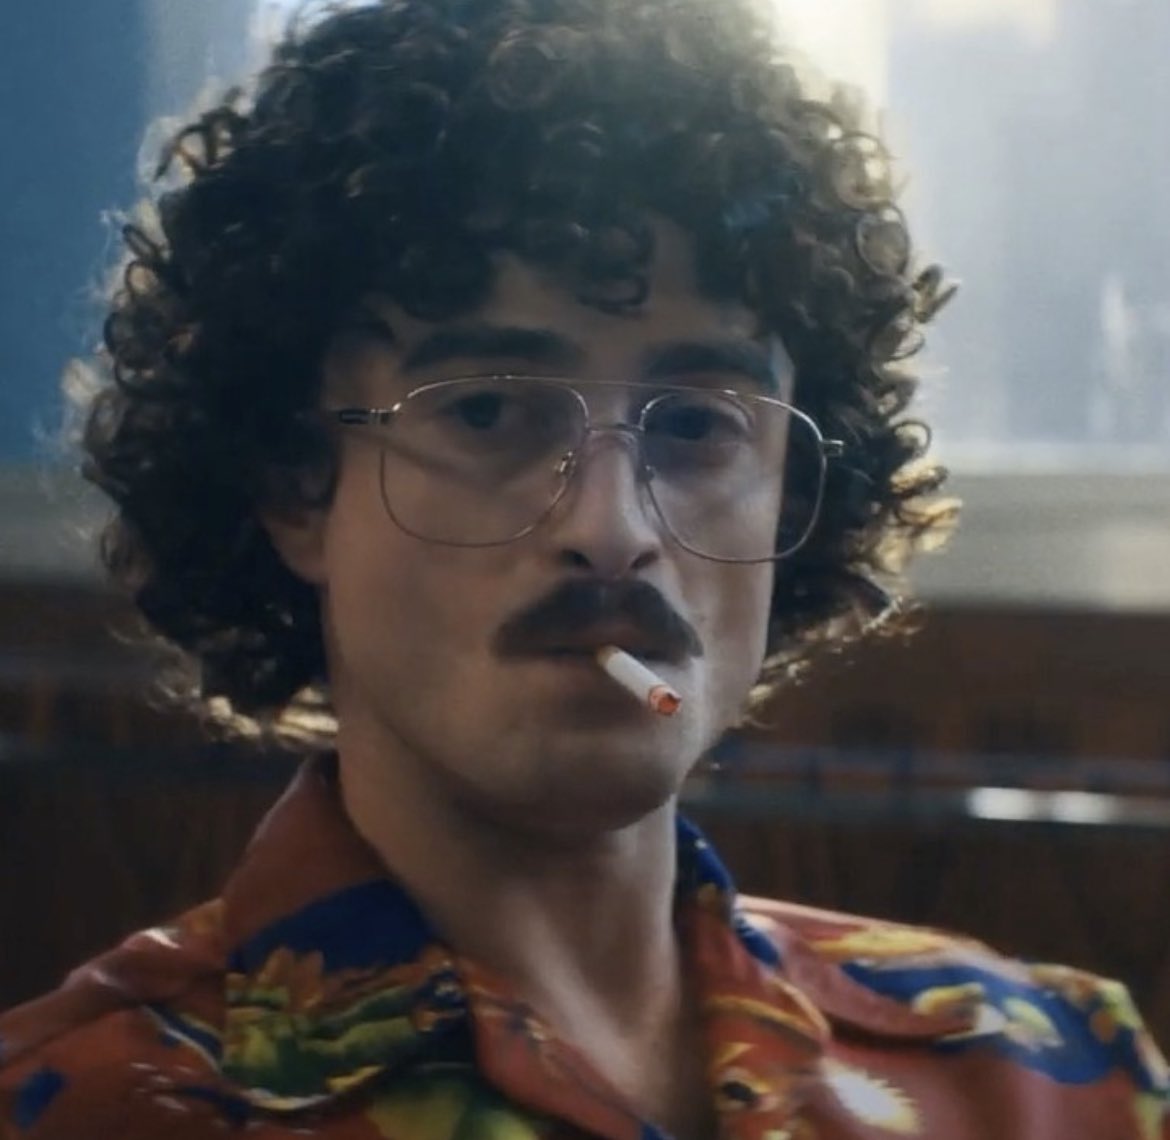 Is—is Daniel Radcliffe gonna make me want to fuck “Weird Al” Yankovic??????????